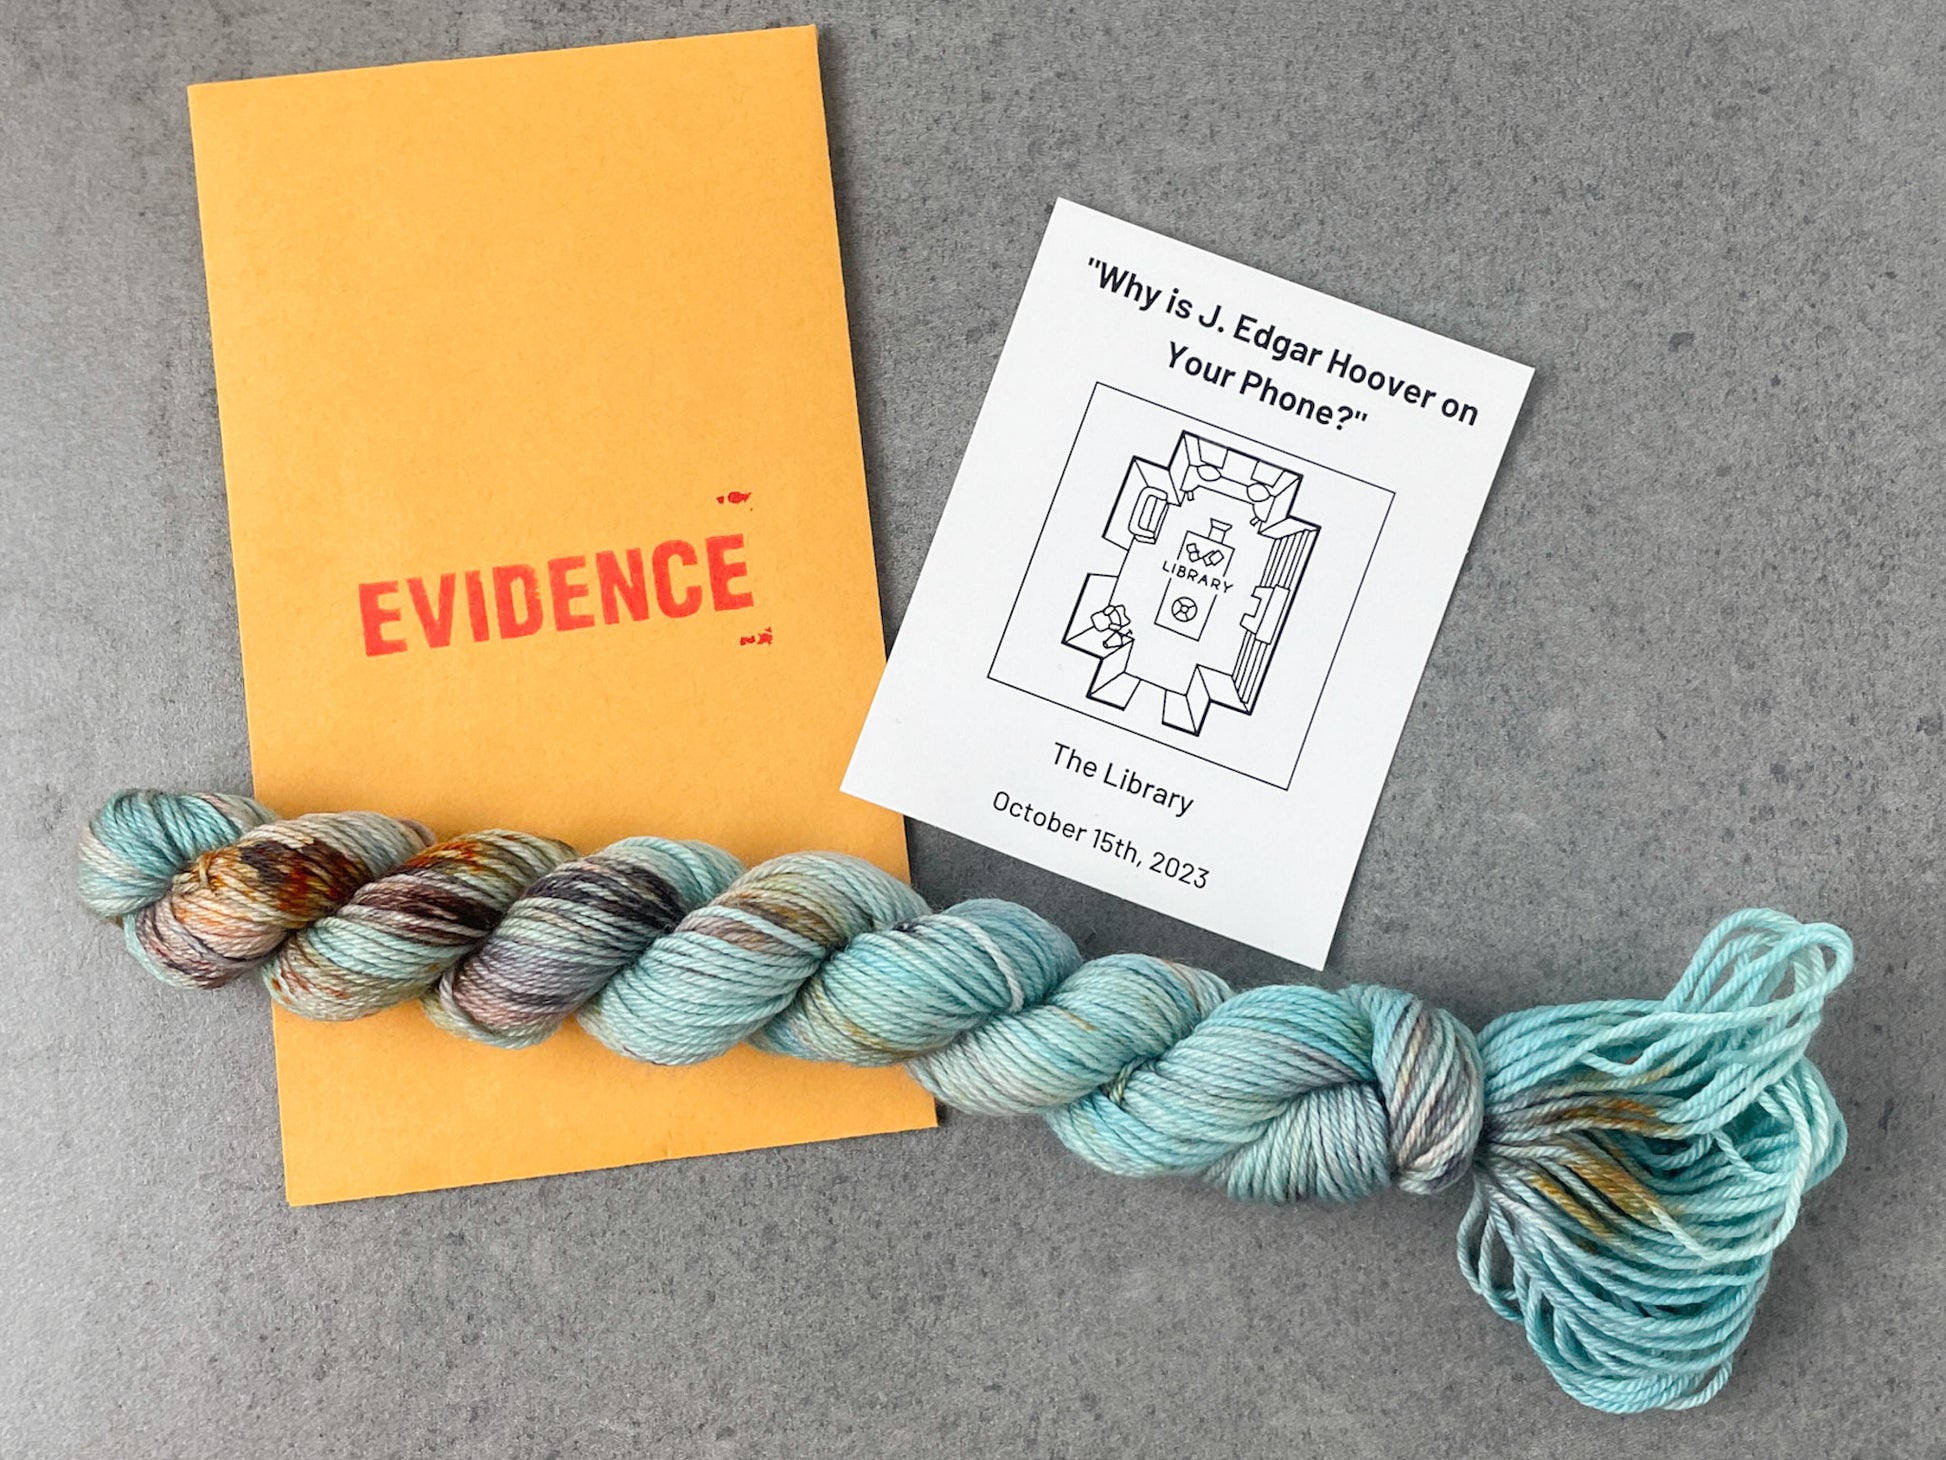 A skein of blue yarn with gray, green, and red speckles on top of an envelope stamped with "Evidence" and a card with an overhead drawing of the library on it.